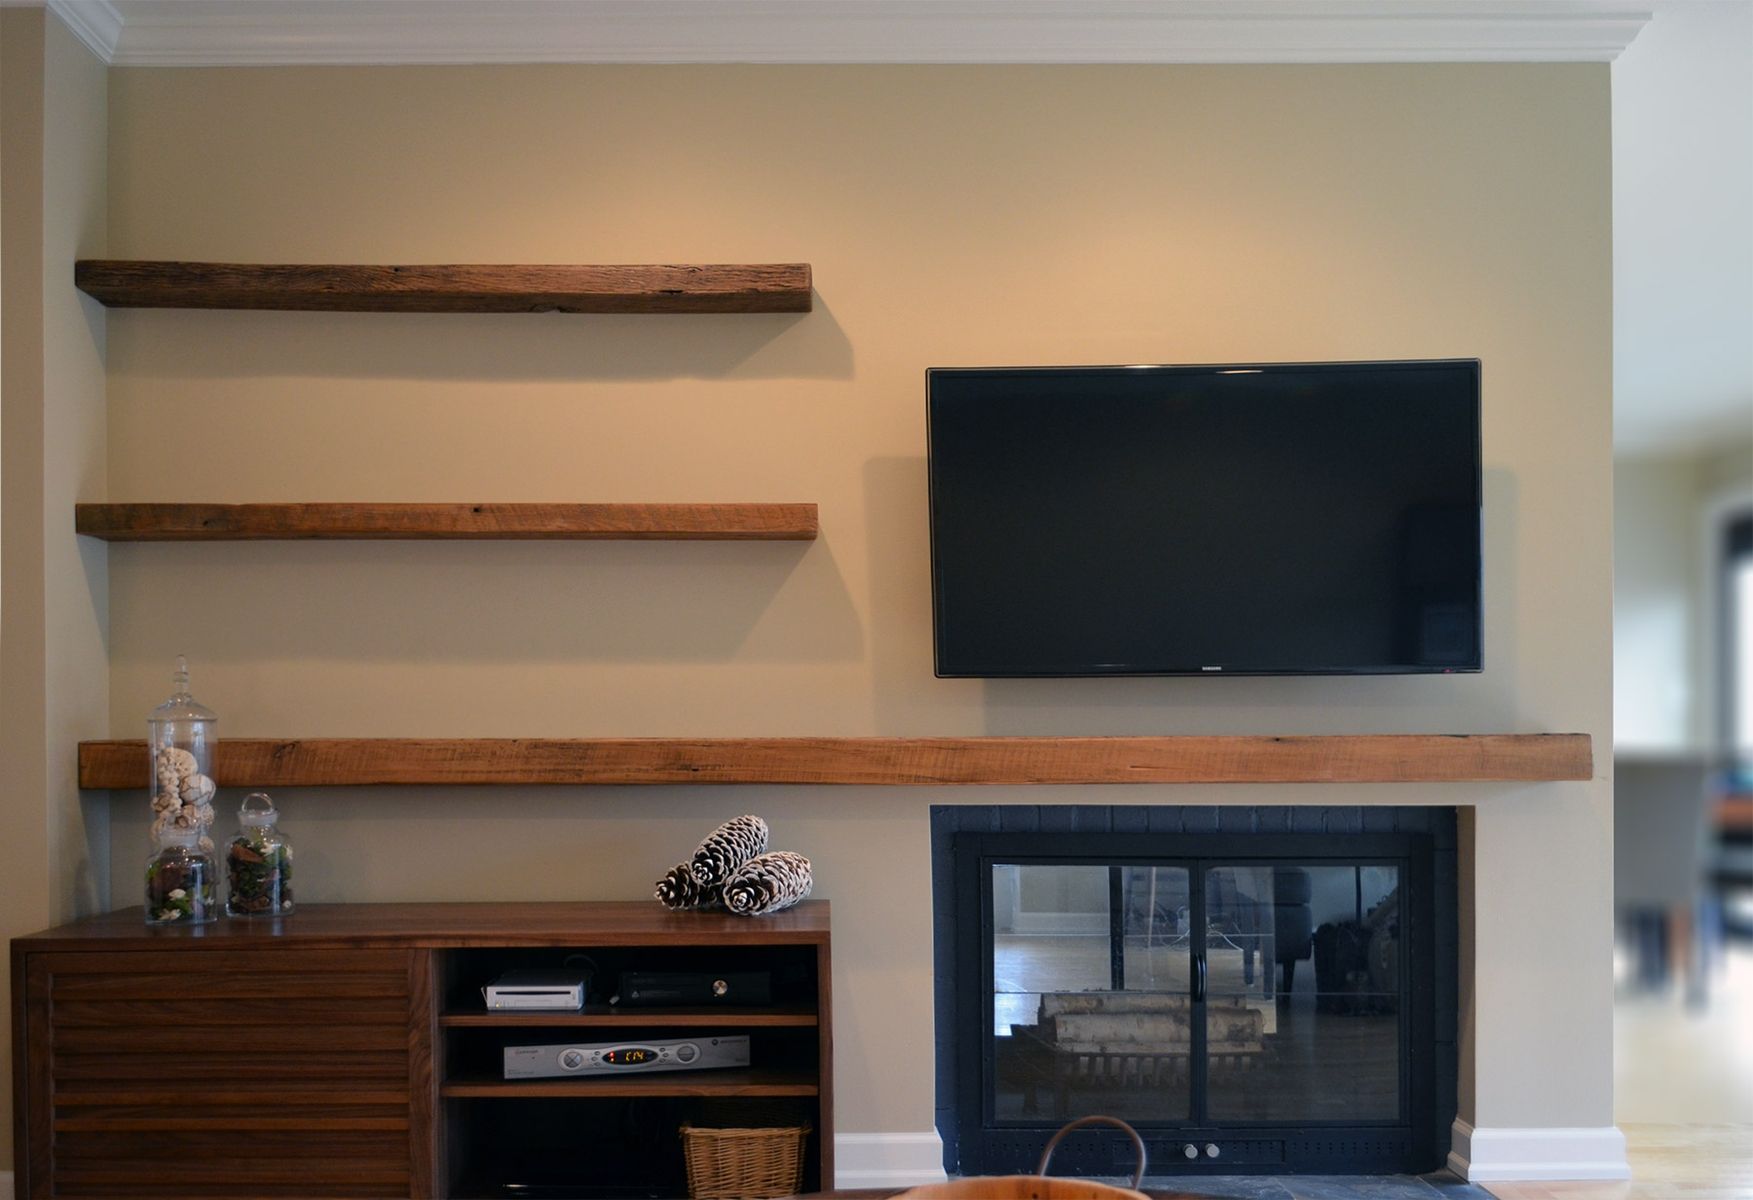 hand made reclaimed lumber floating shelves abodeacious entertainment system custom metal coat rack with shelf shoe storage and organization hafele countertop brackets kitchen